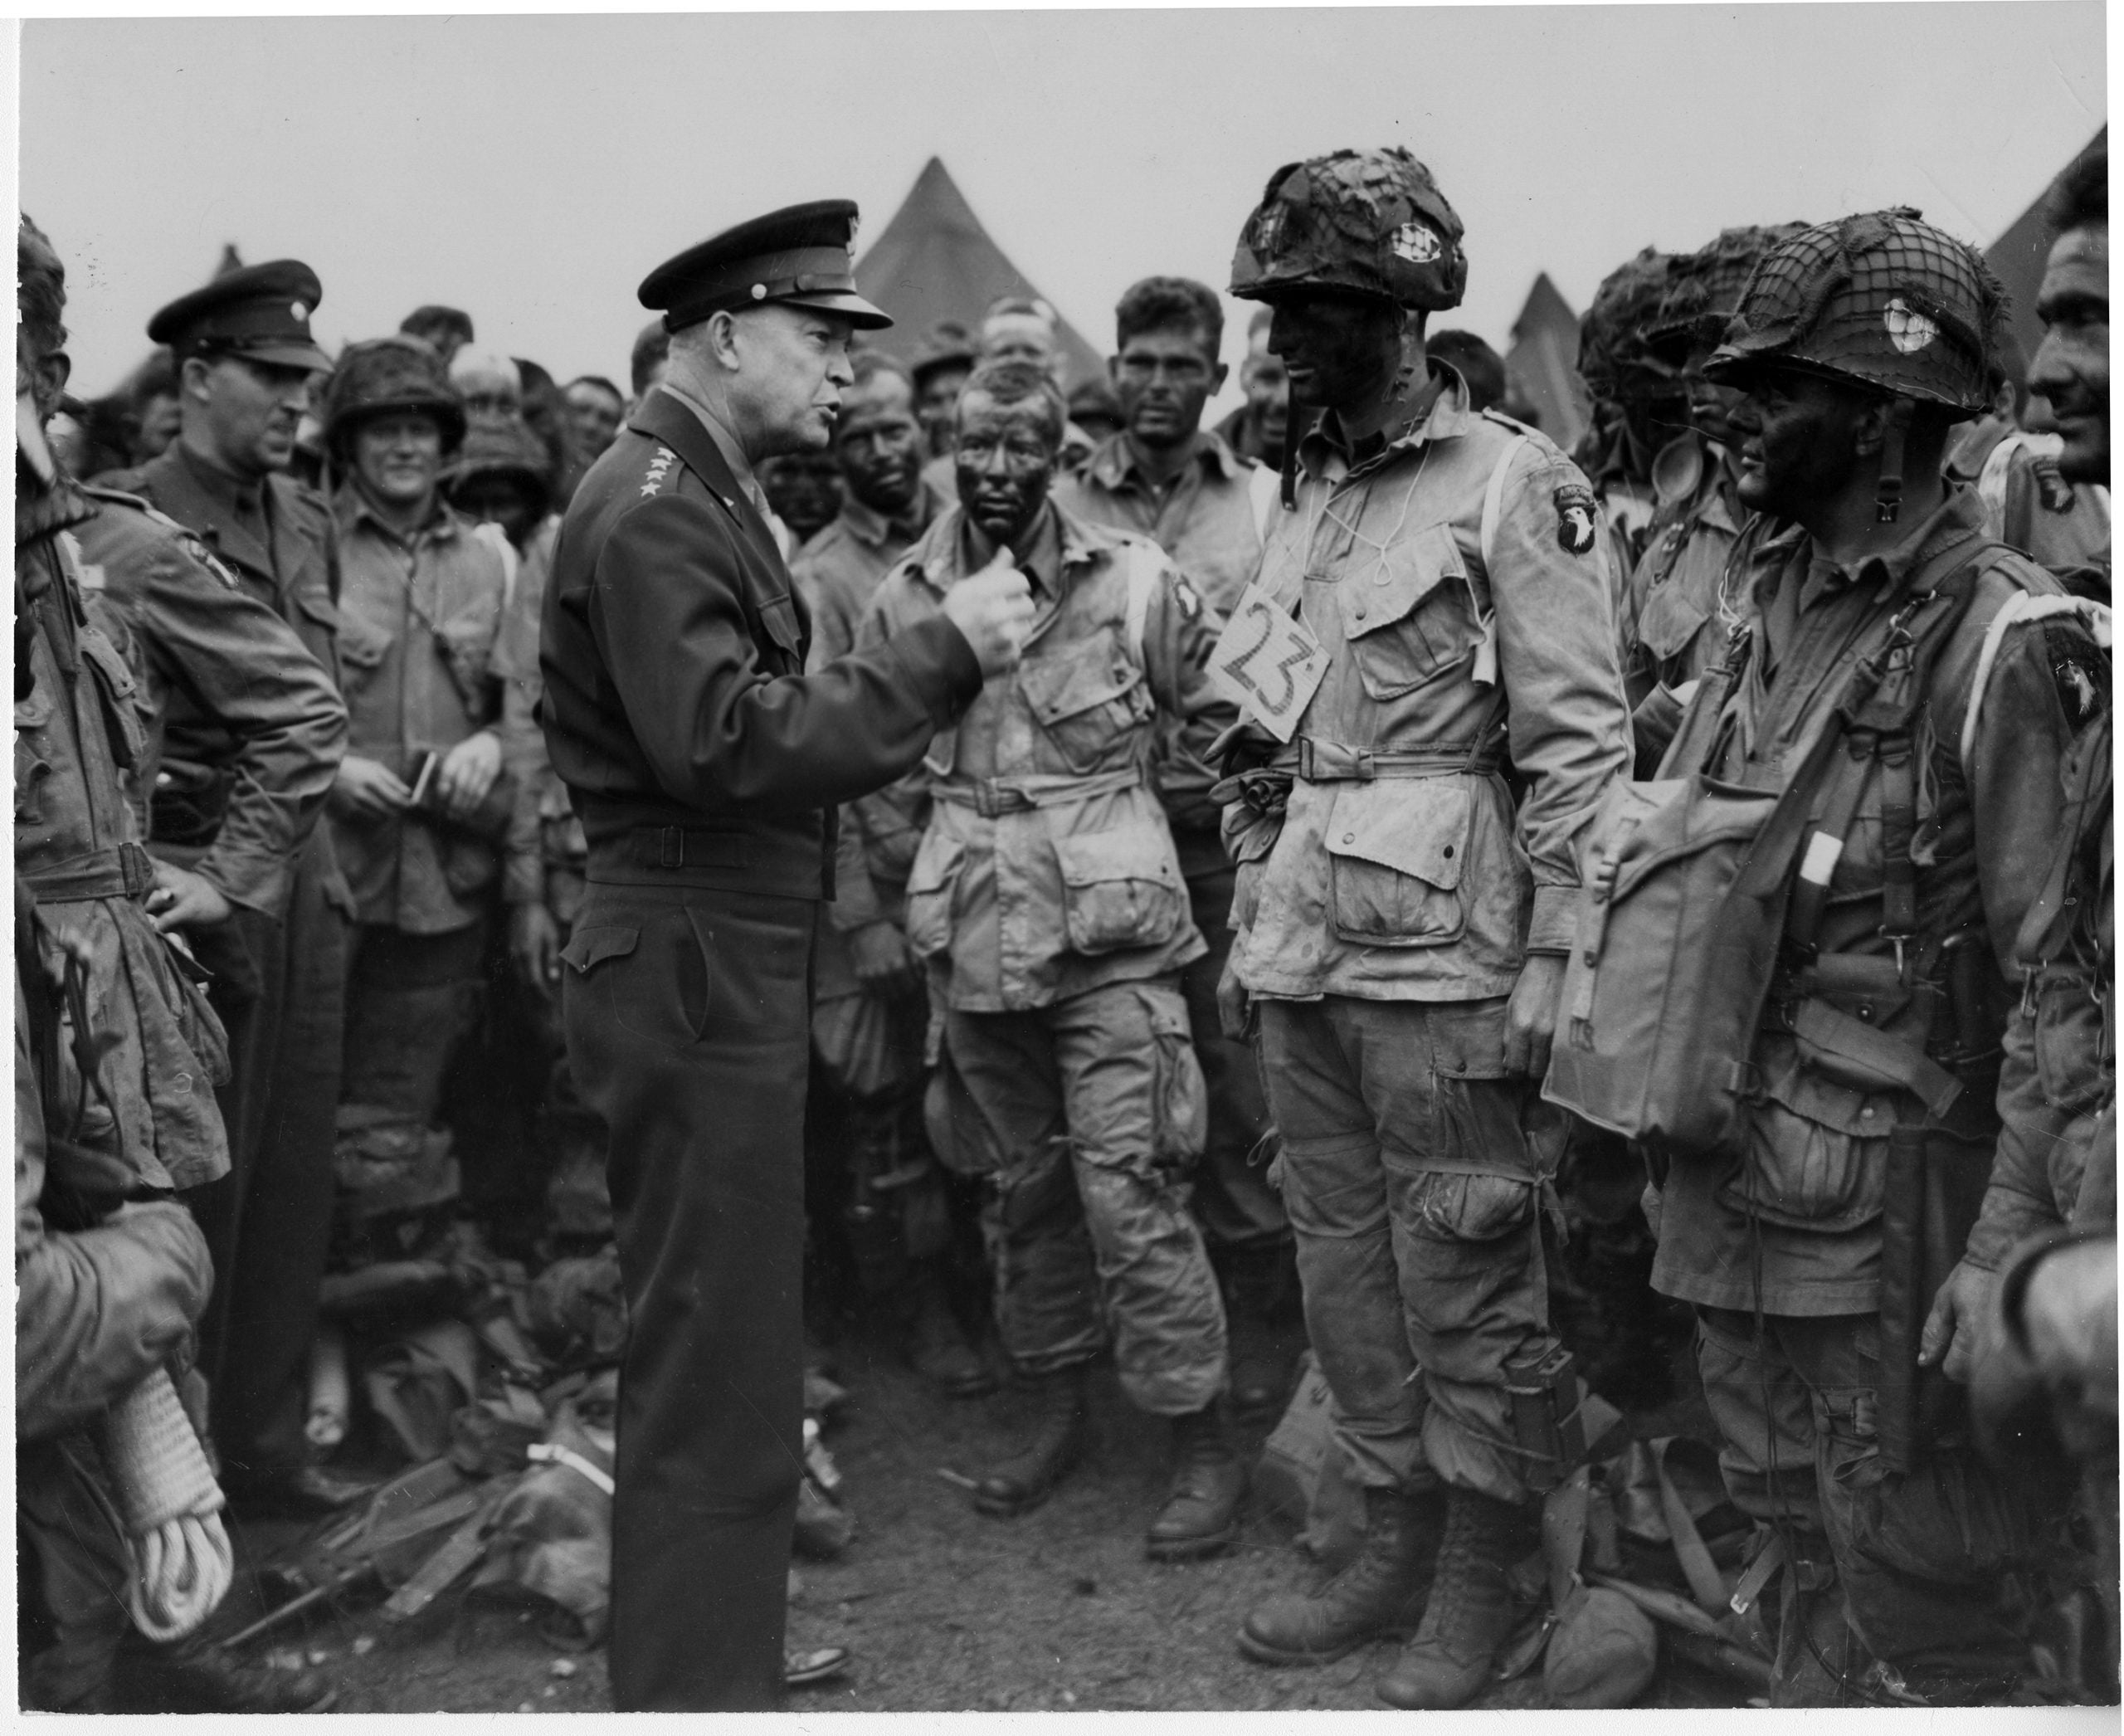 https://bretbaier.com/wp-content/uploads/2020/07/ike-with-soldiers-scaled.jpg